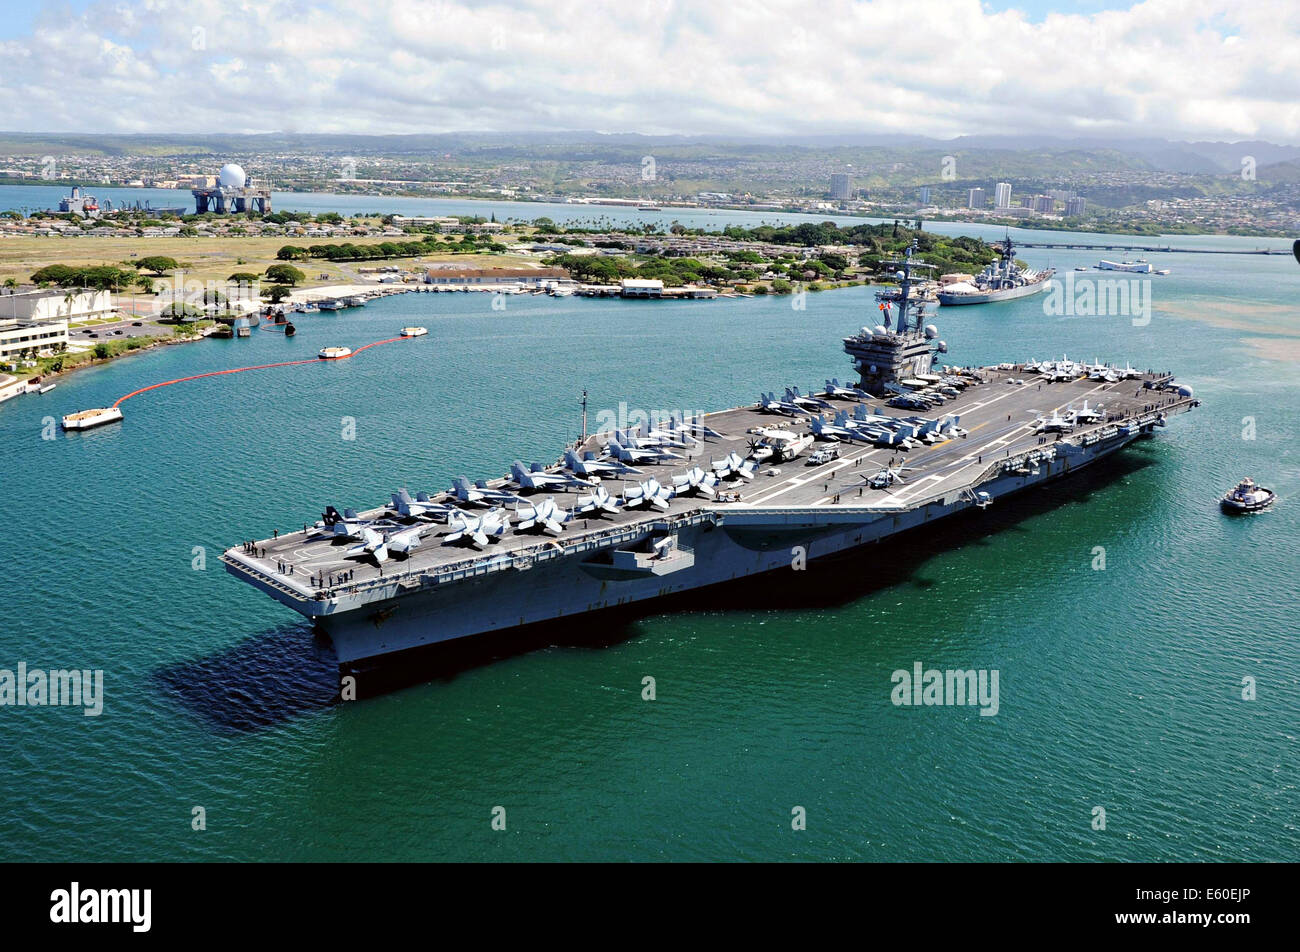 US Navy nuclear aircraft carrier USS Ronald Reagan departs Joint Base Pearl Harbor-Hickam after participating in Rim of the Pacific Exercise August 3, 2014 in Honolulu, Hawaii. Stock Photo